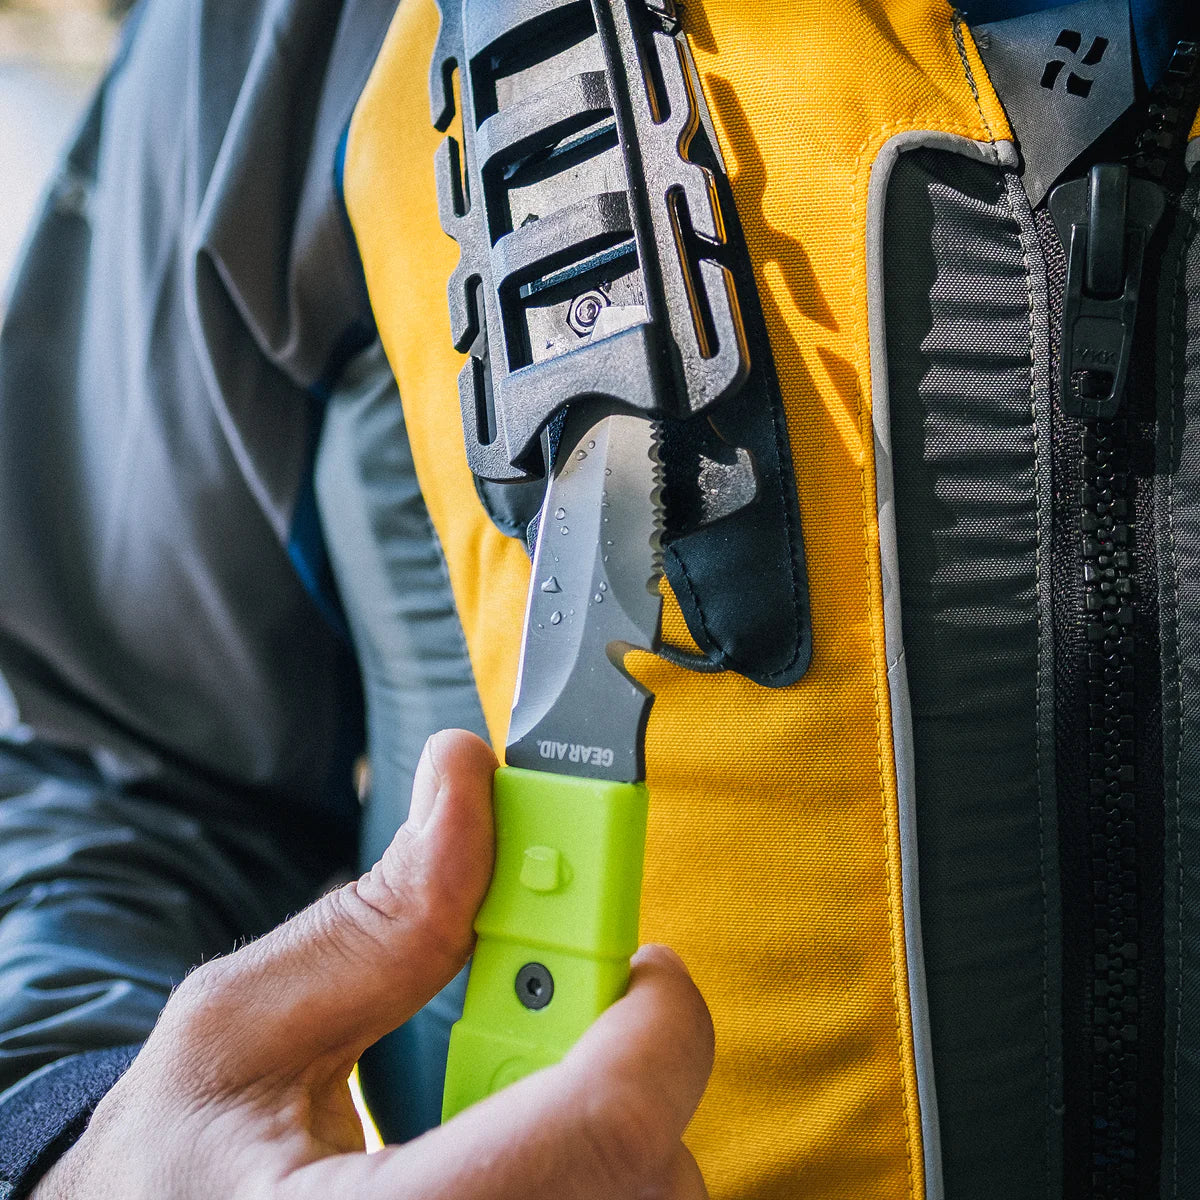 A person equipped with the Gear Aid Akua Knife, ready for freshwater adventures and potential rescue situations, discreetly tucked away in their jacket.